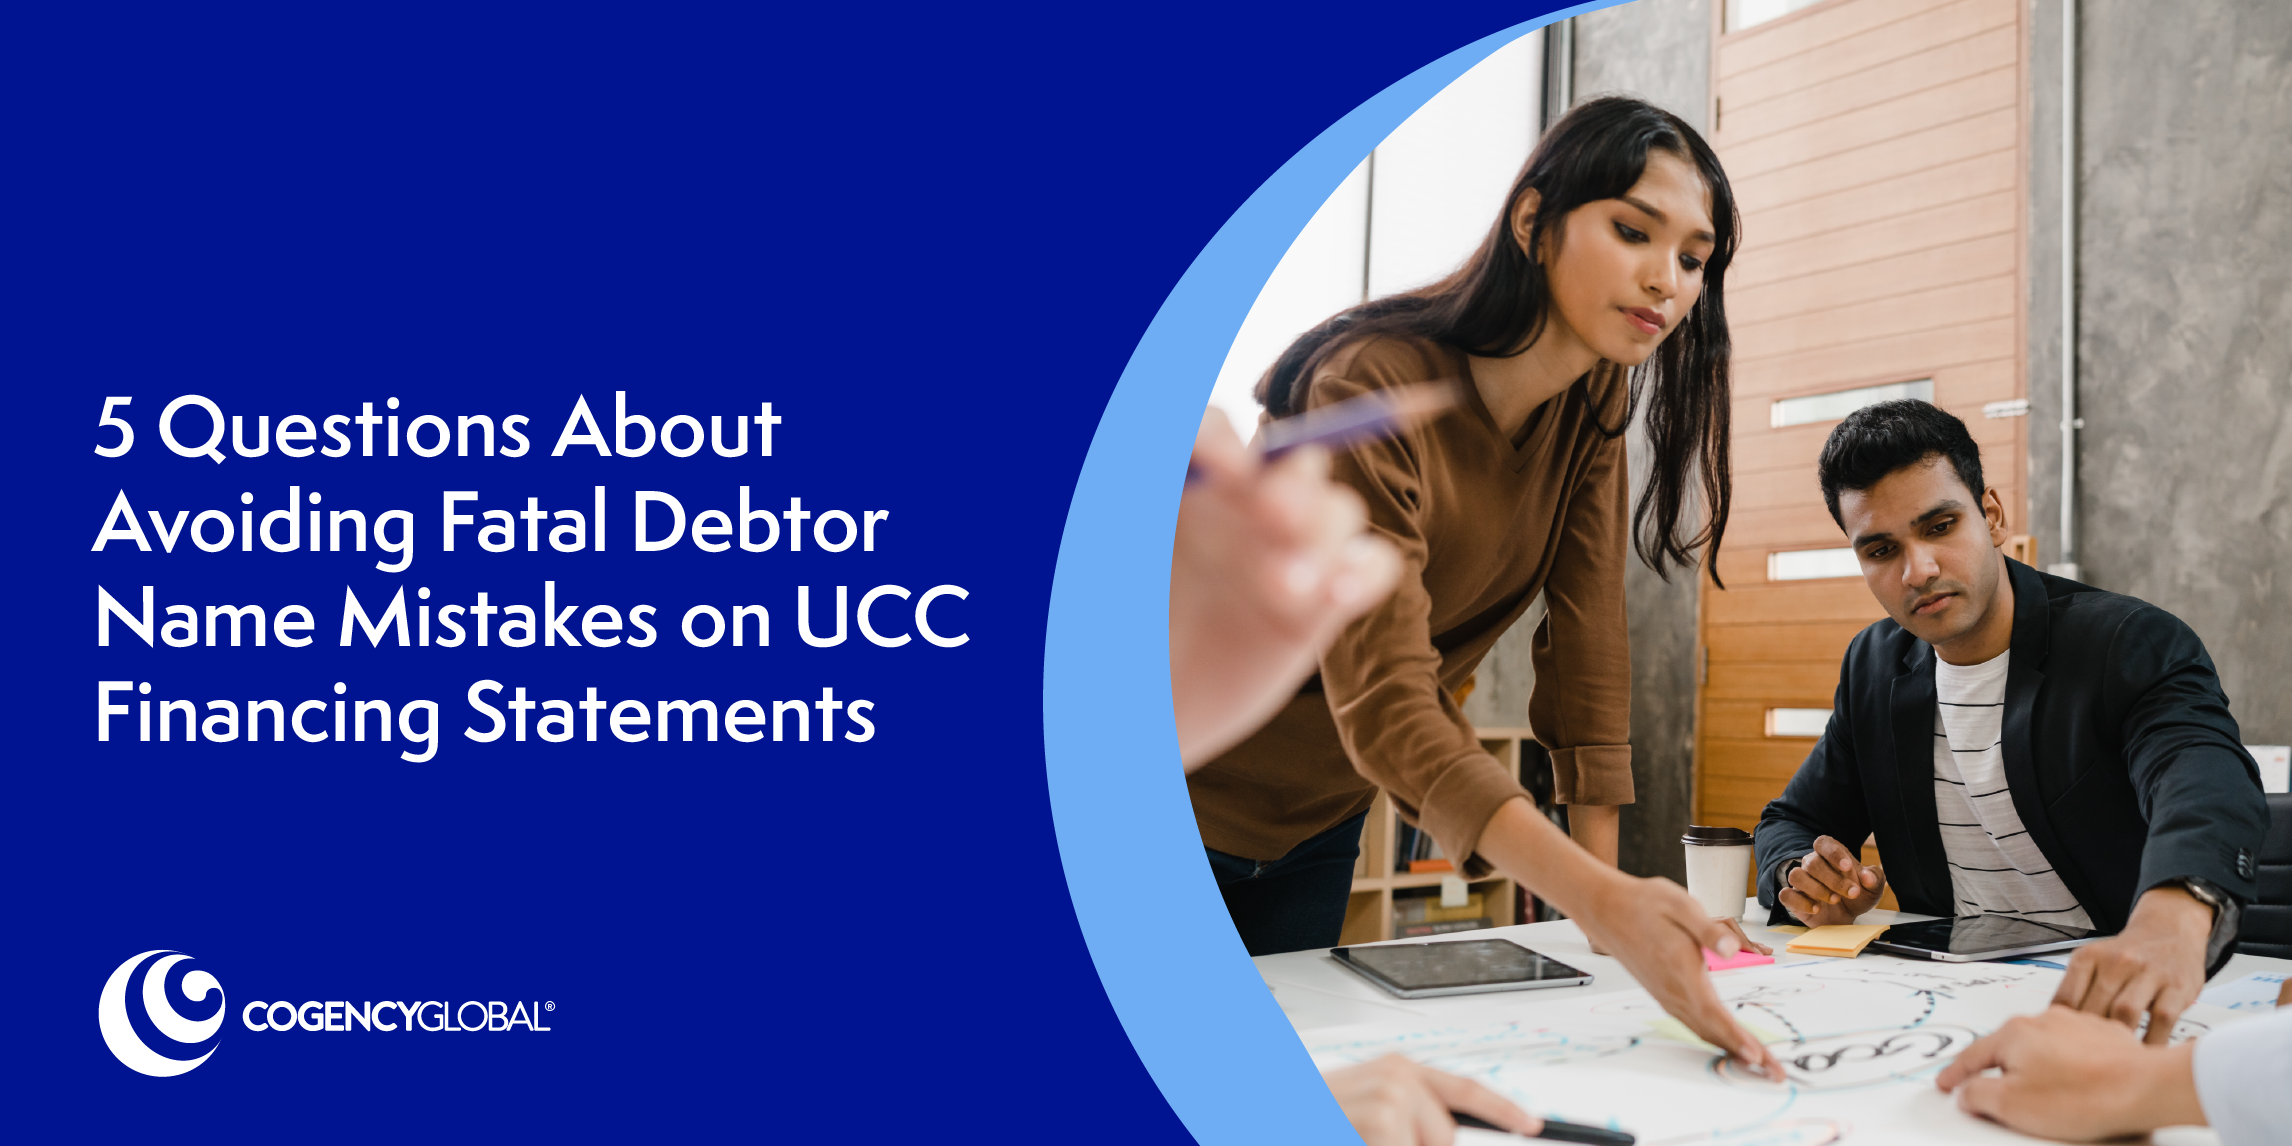 5 Questions About Avoiding Fatal Debtor Name Mistakes on UCC Financing Statements